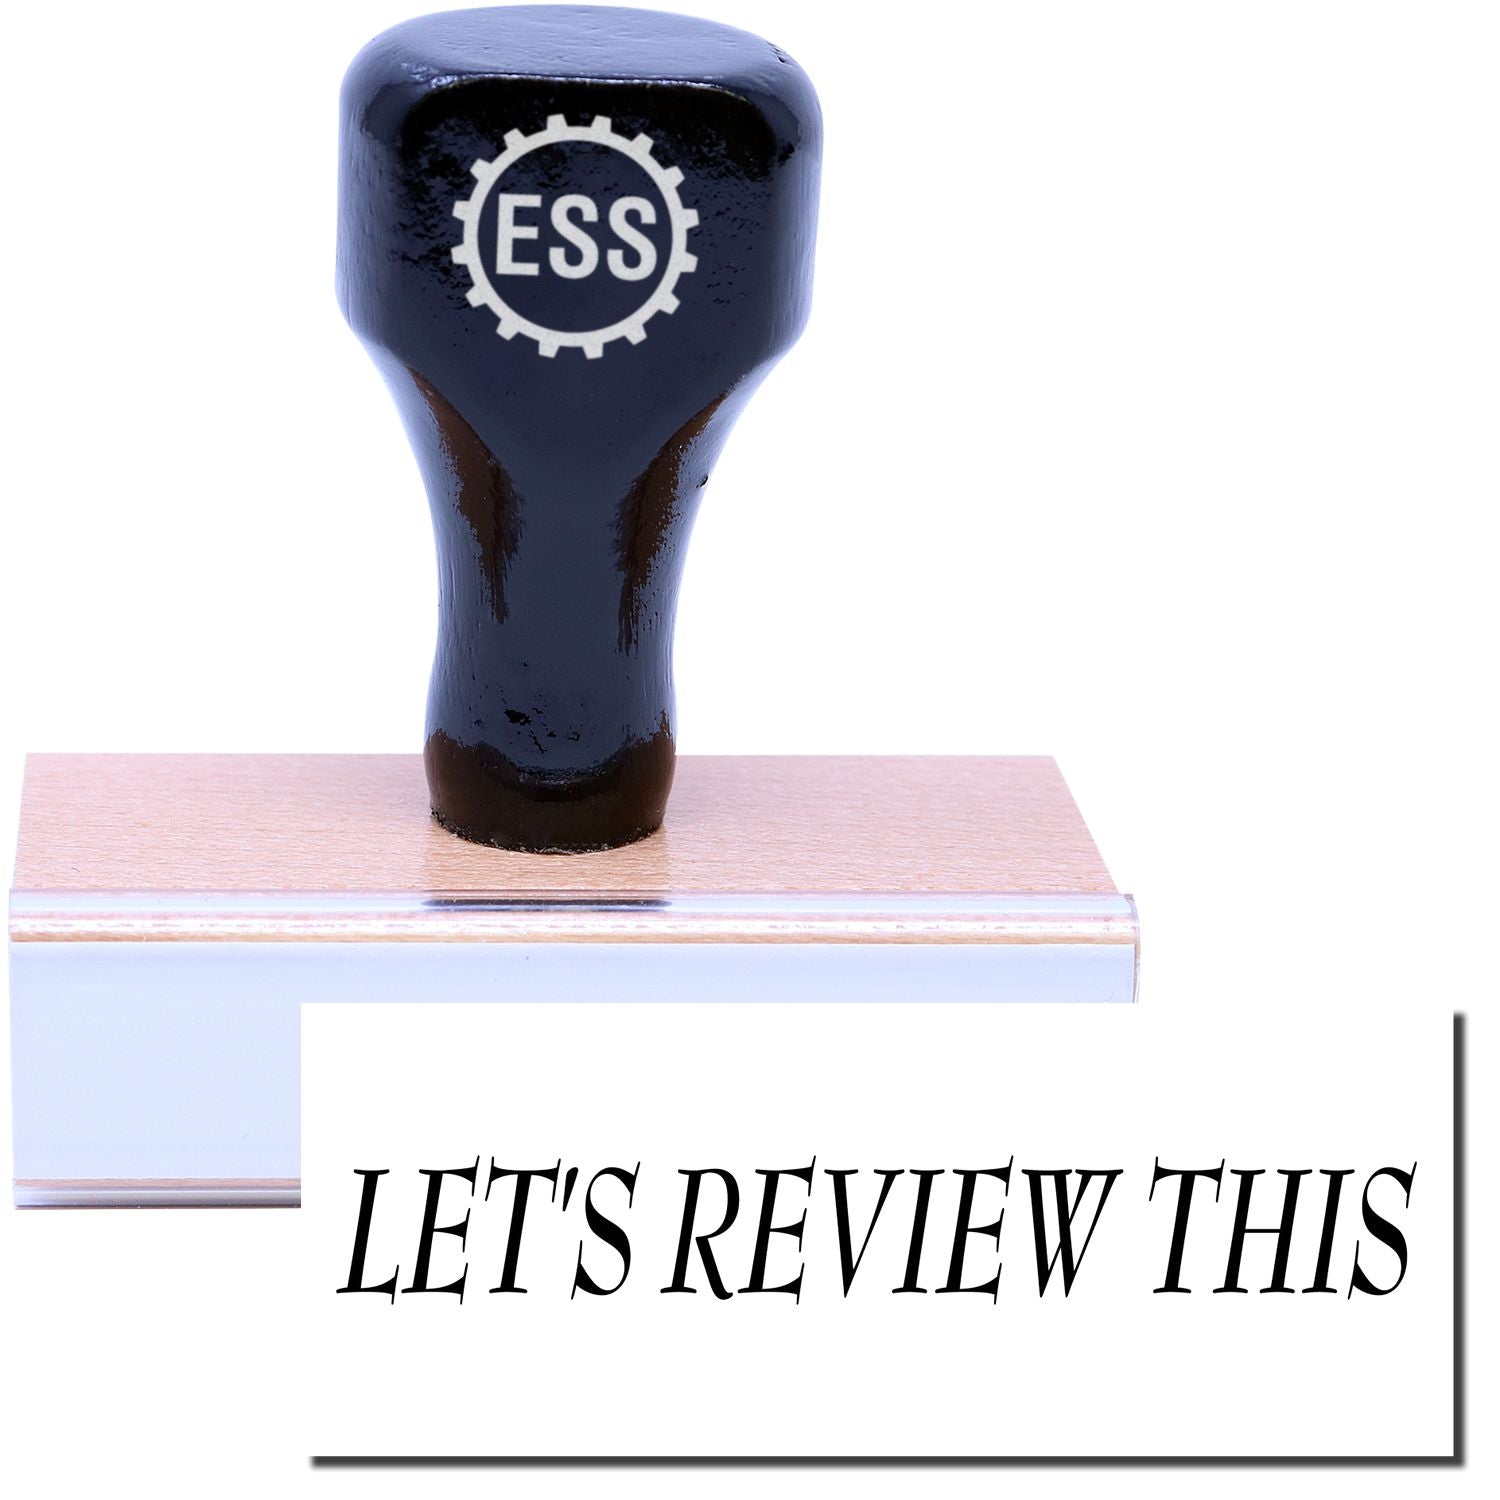 A stock office rubber stamp with a stamped image showing how the text "LET'S REVIEW THIS" in a large font is displayed after stamping.